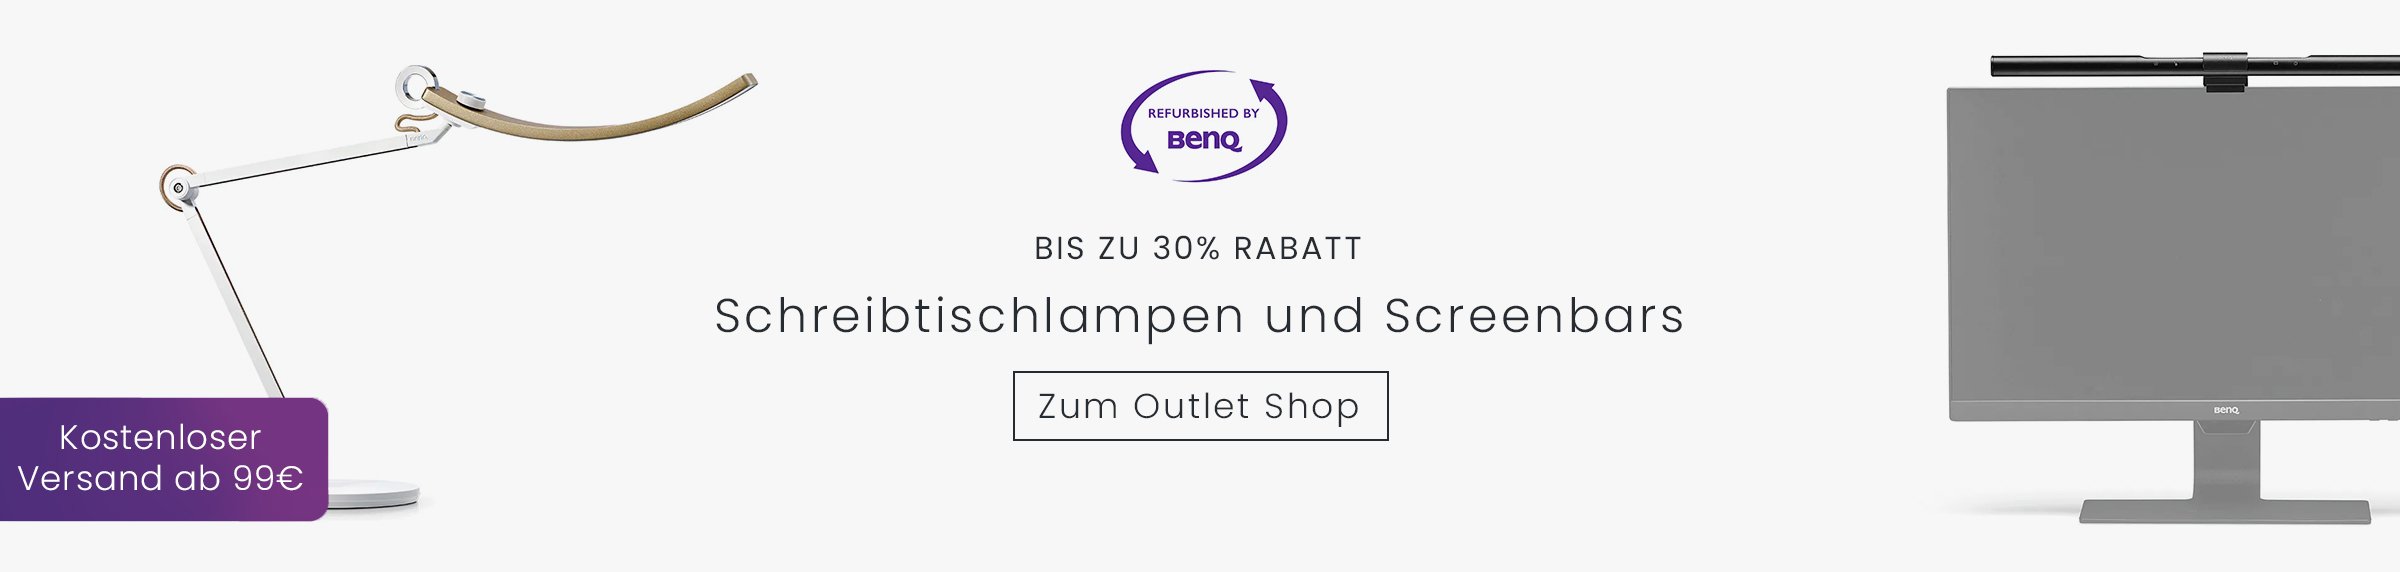 Beleuchtungs-Outlet-Shop